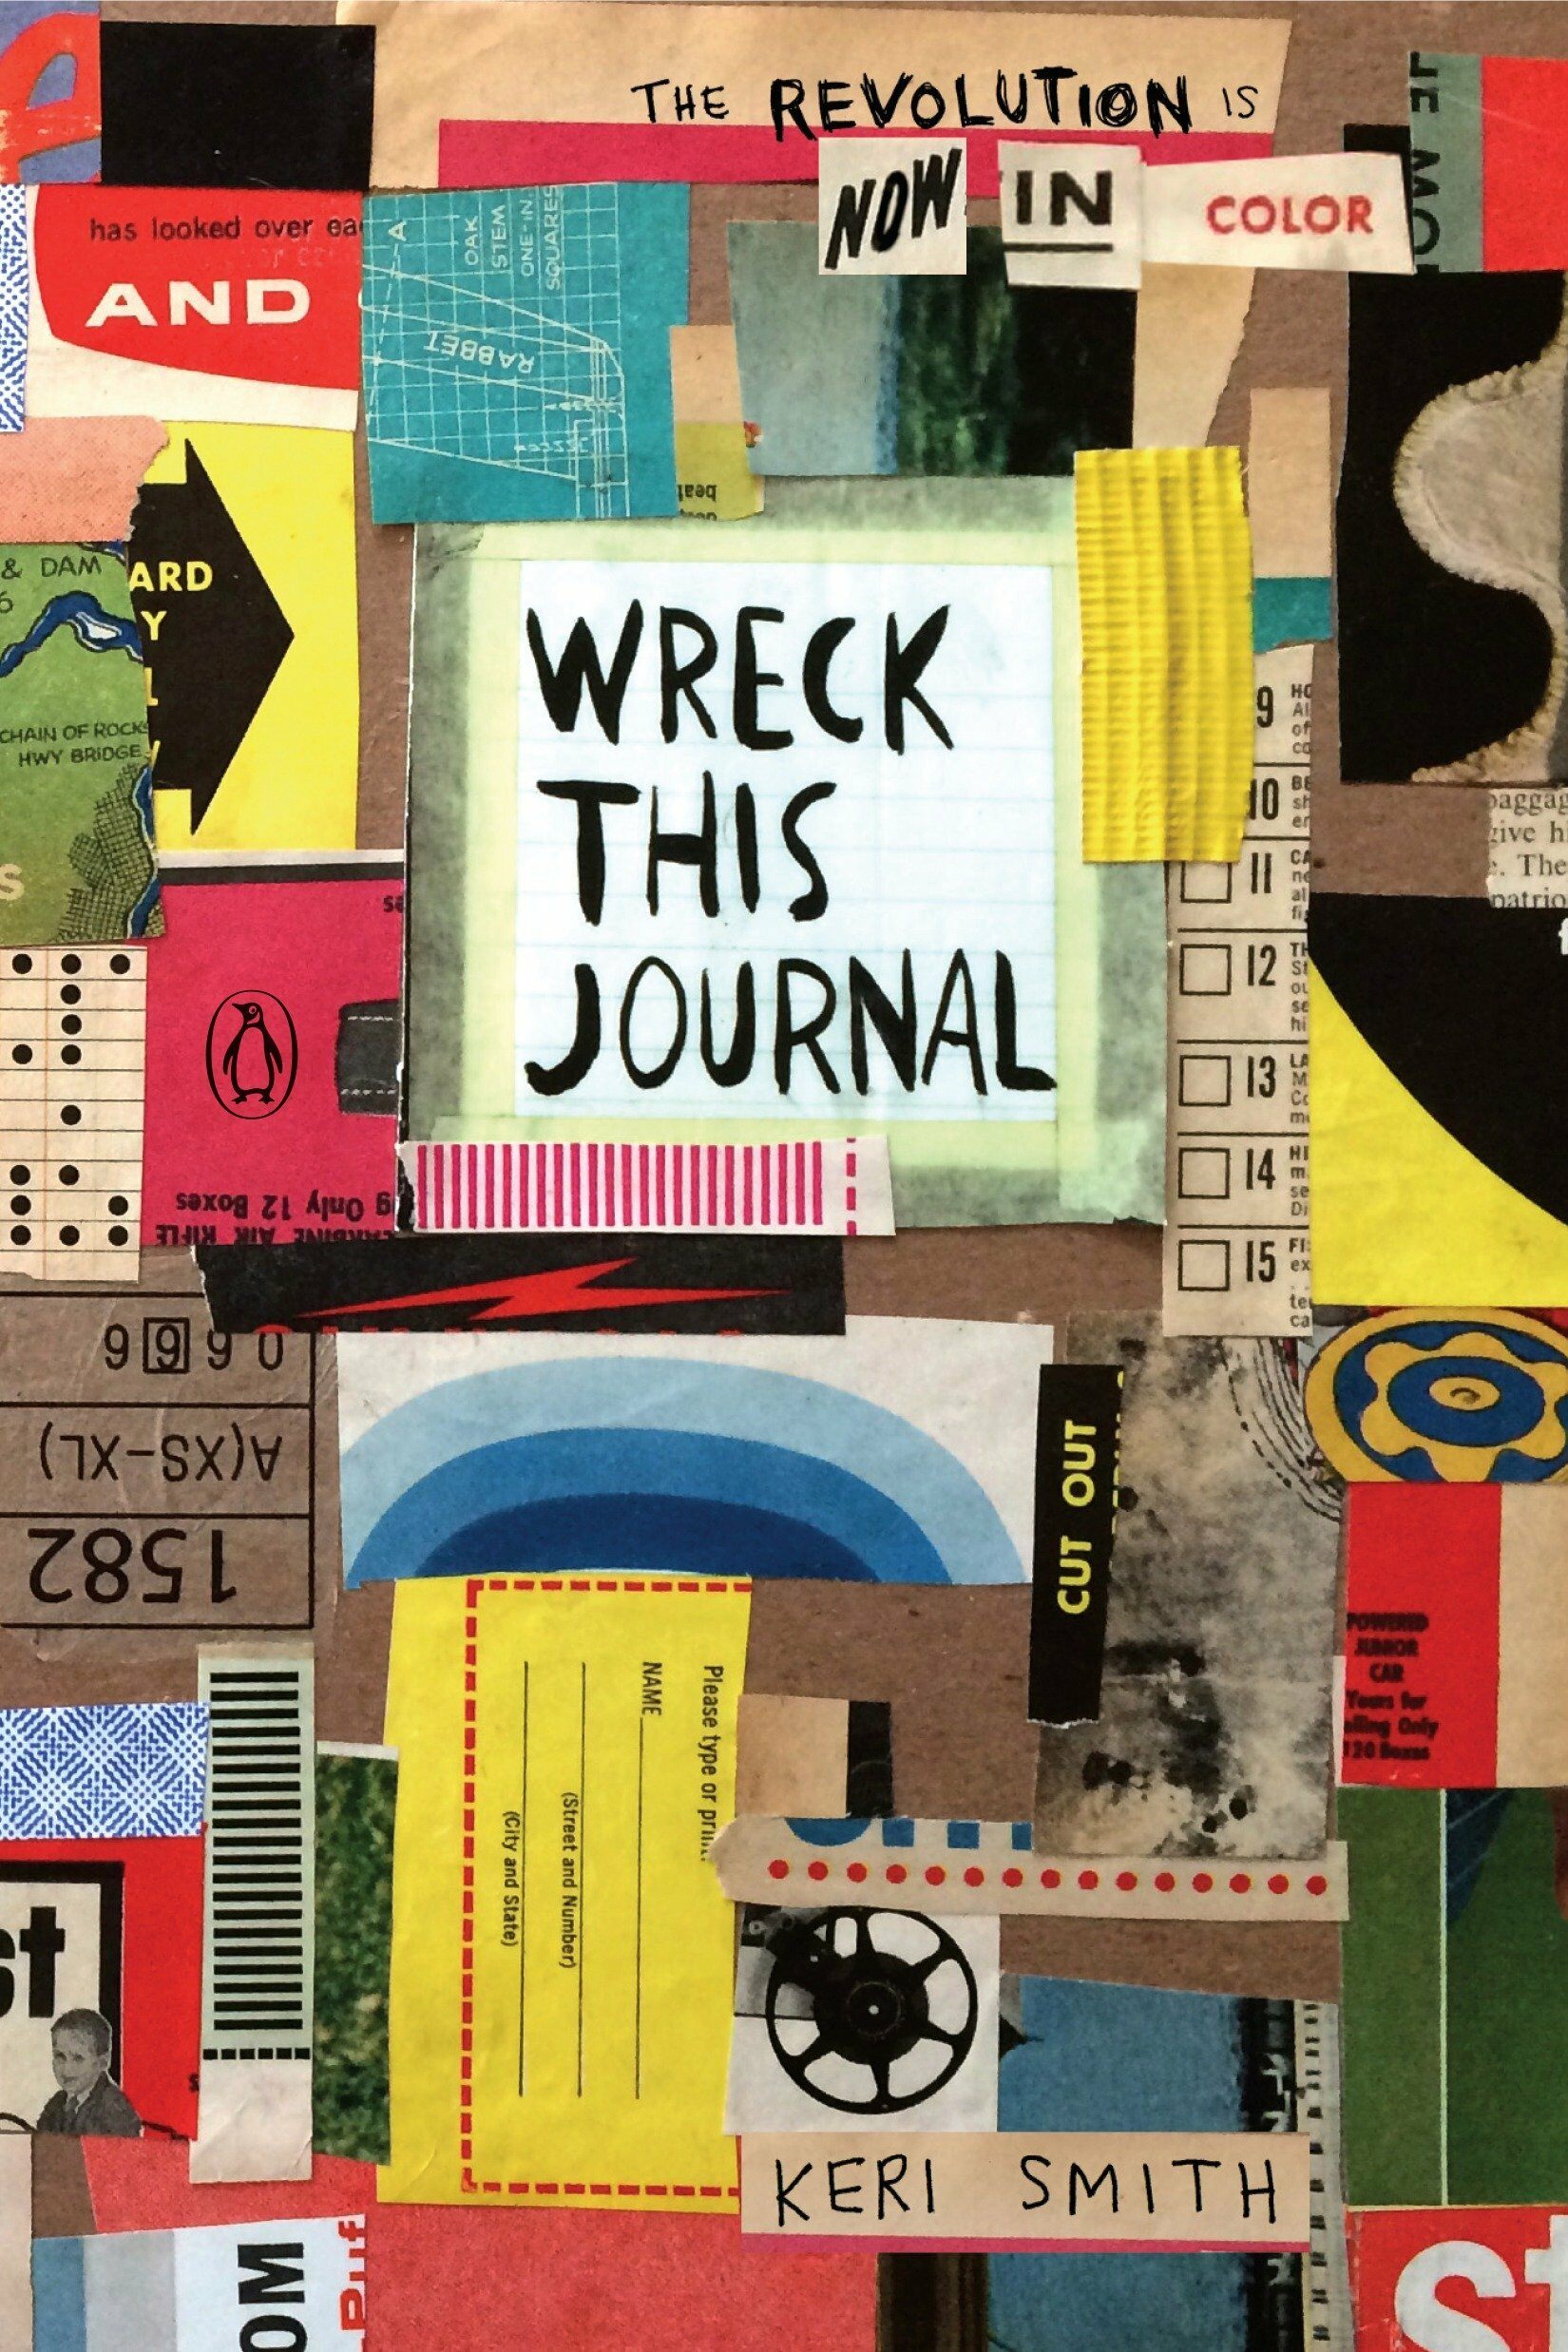 Wreck This Journal: Now in Color (Paperback)